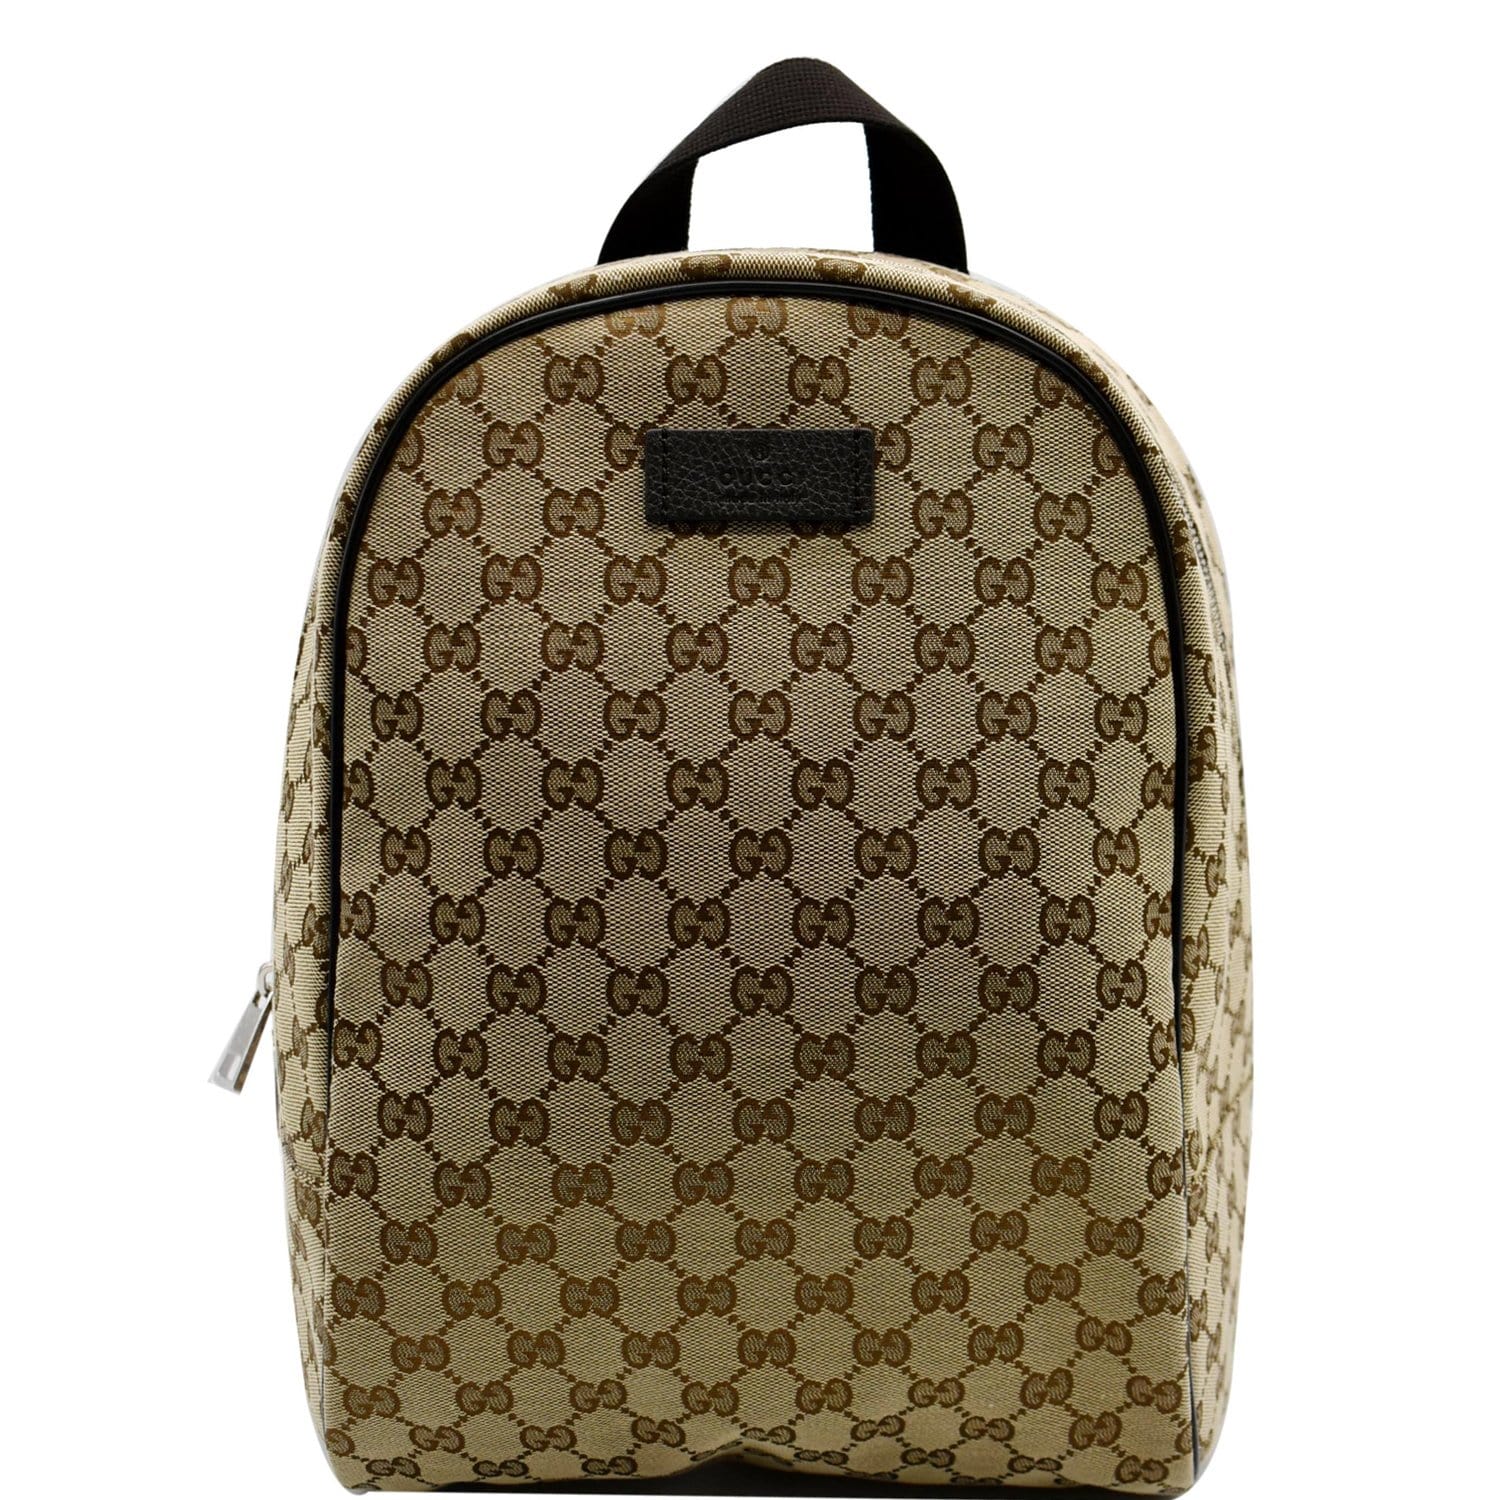 Gucci, Bags, Authentic Gucci Brown Gold Monogram Canvas Travel Duffle Bag